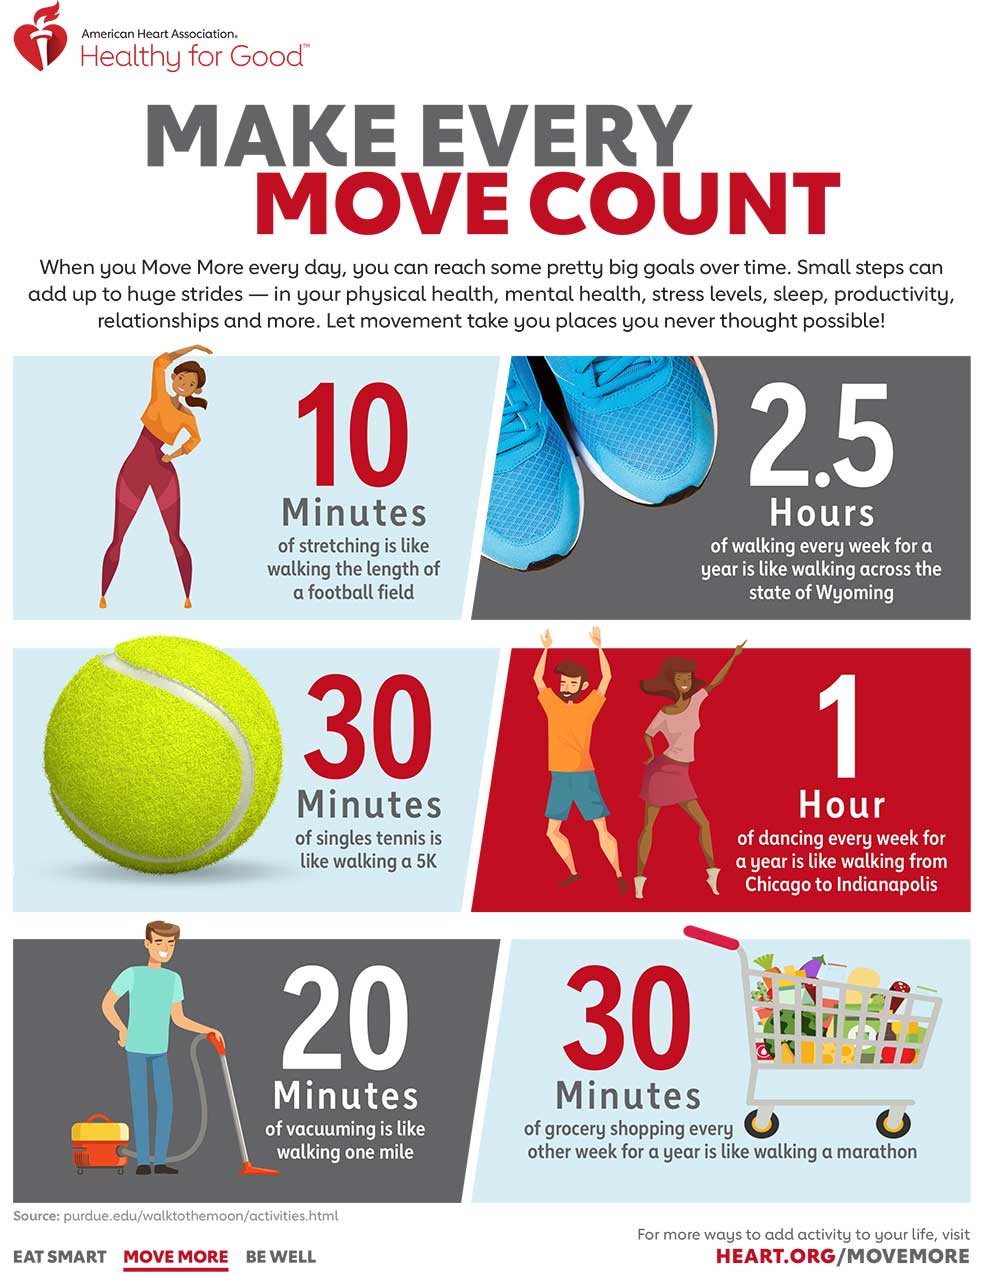 5 Everyday Activities You're Already Doing That Count as Exercise